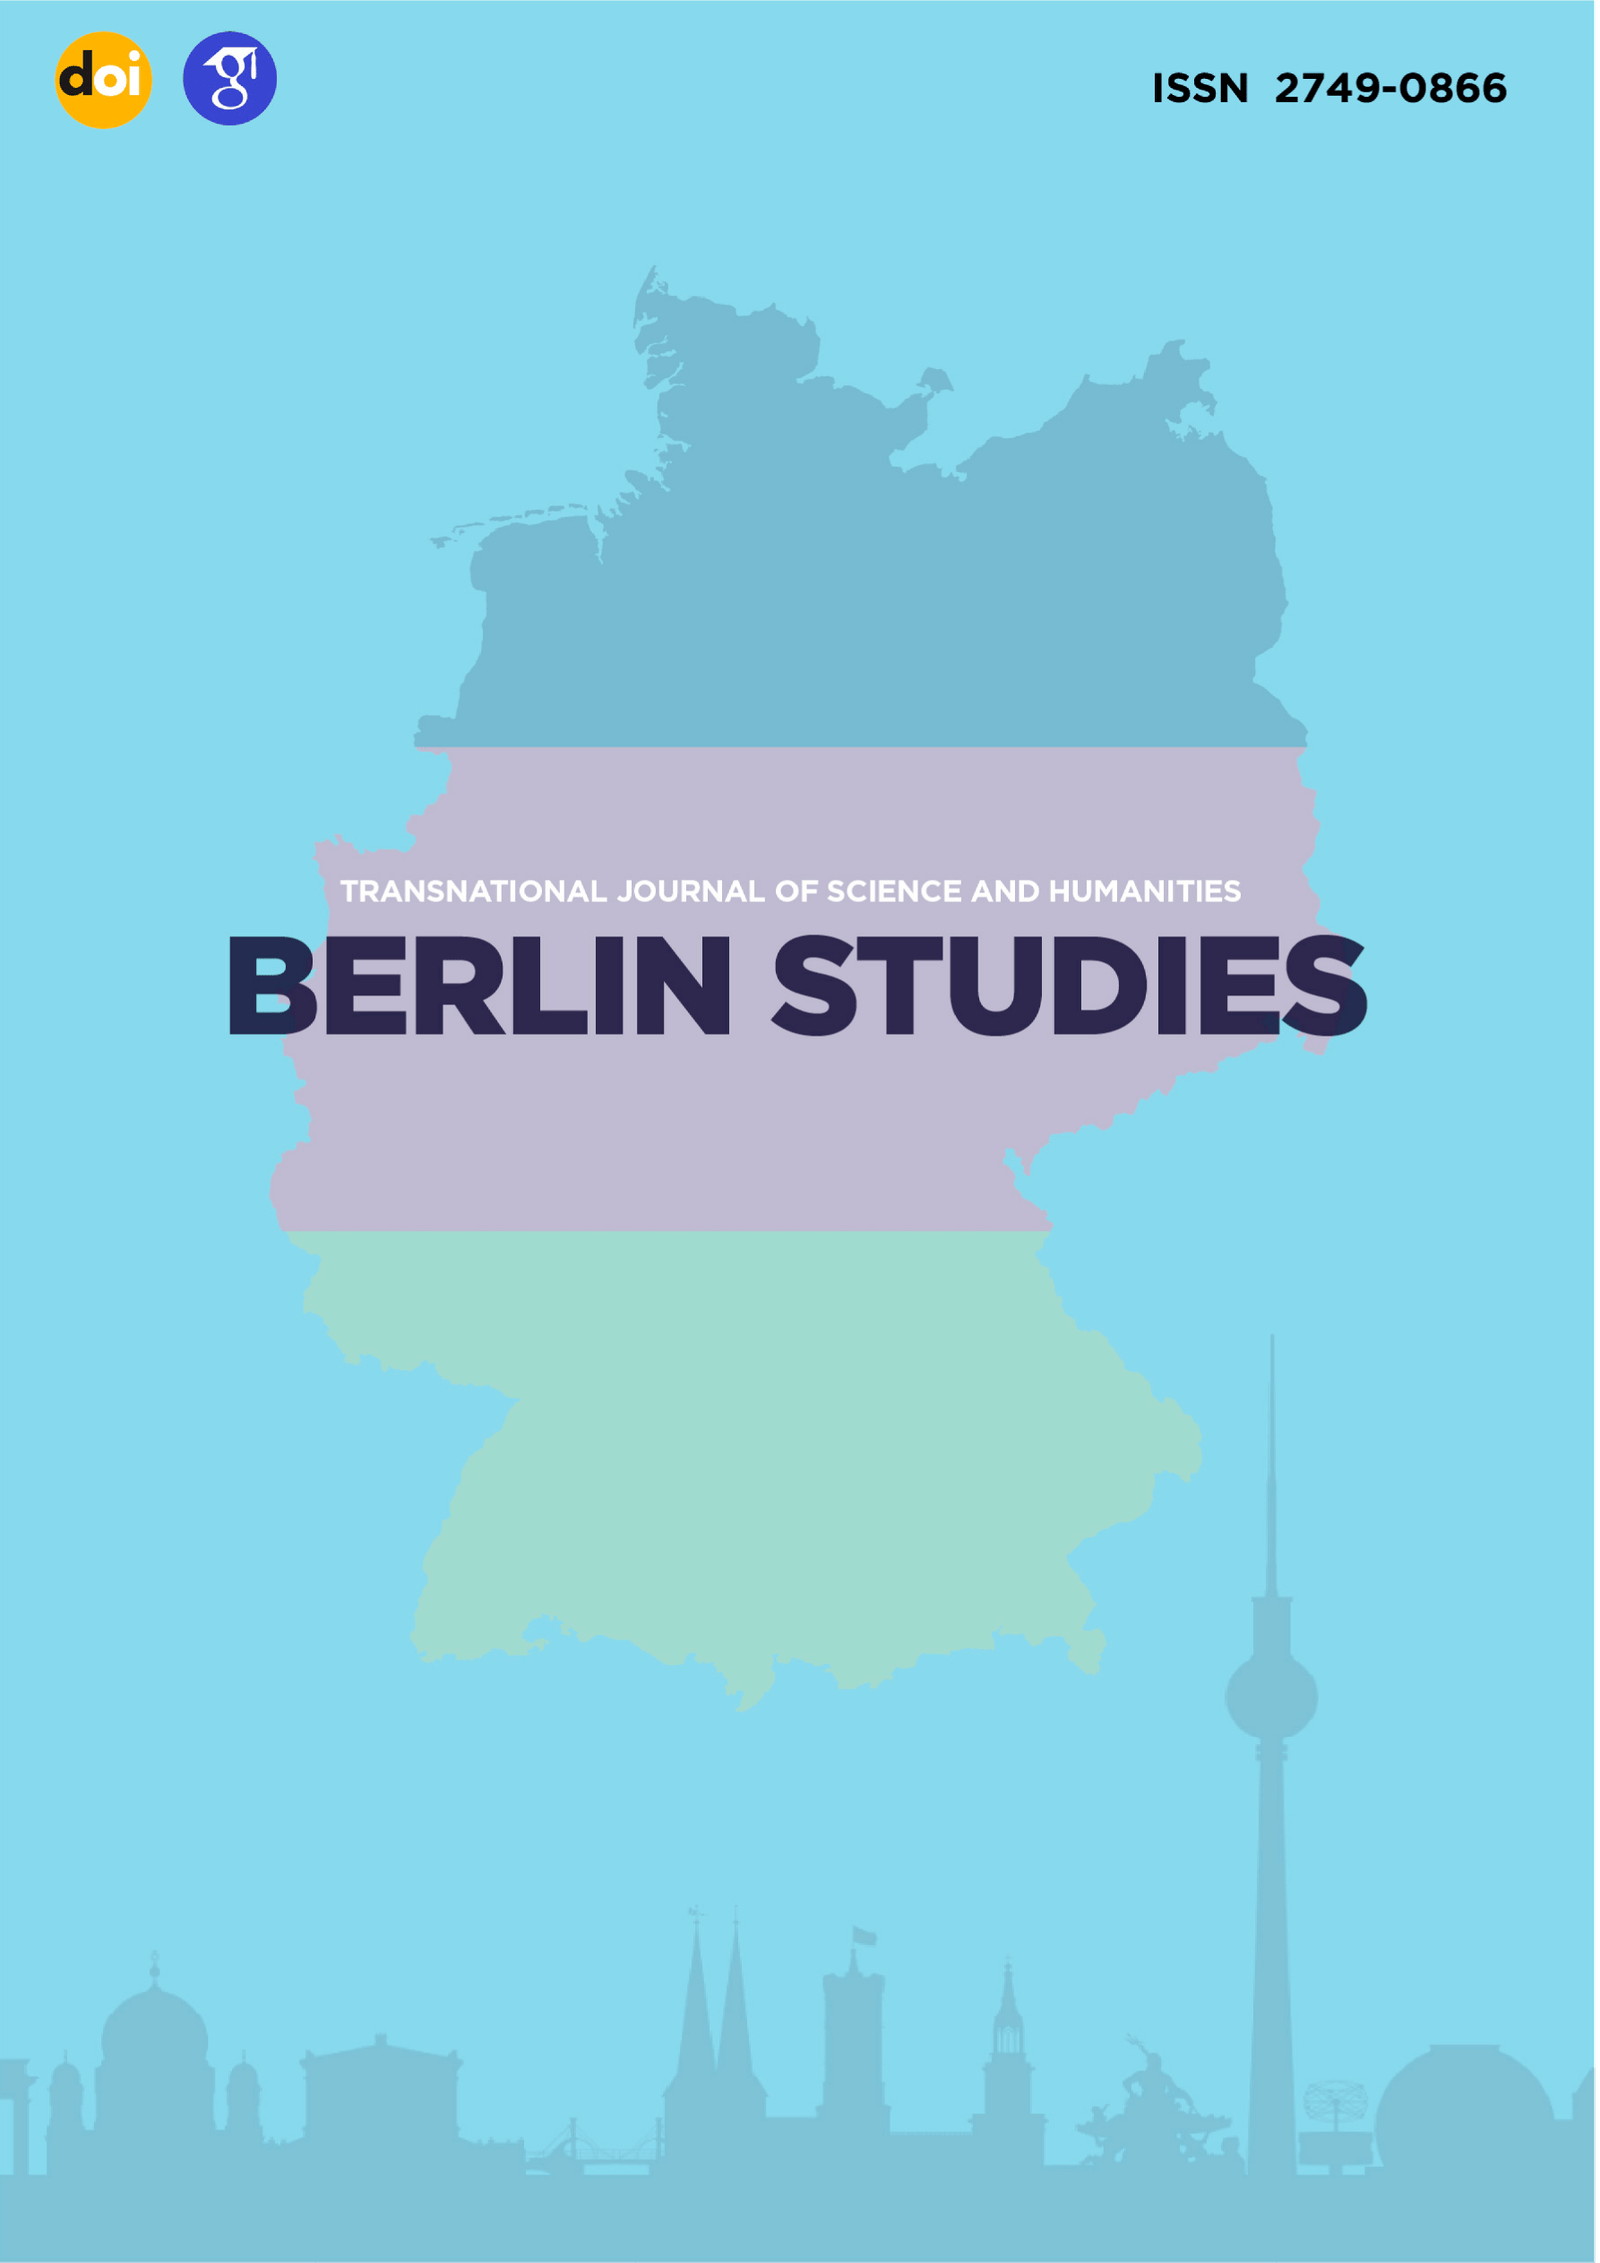 					View Vol. 1 No. 1.2 Historical sciences (2021): Berlin Studies Transnational Journal of Science and Humanities
				